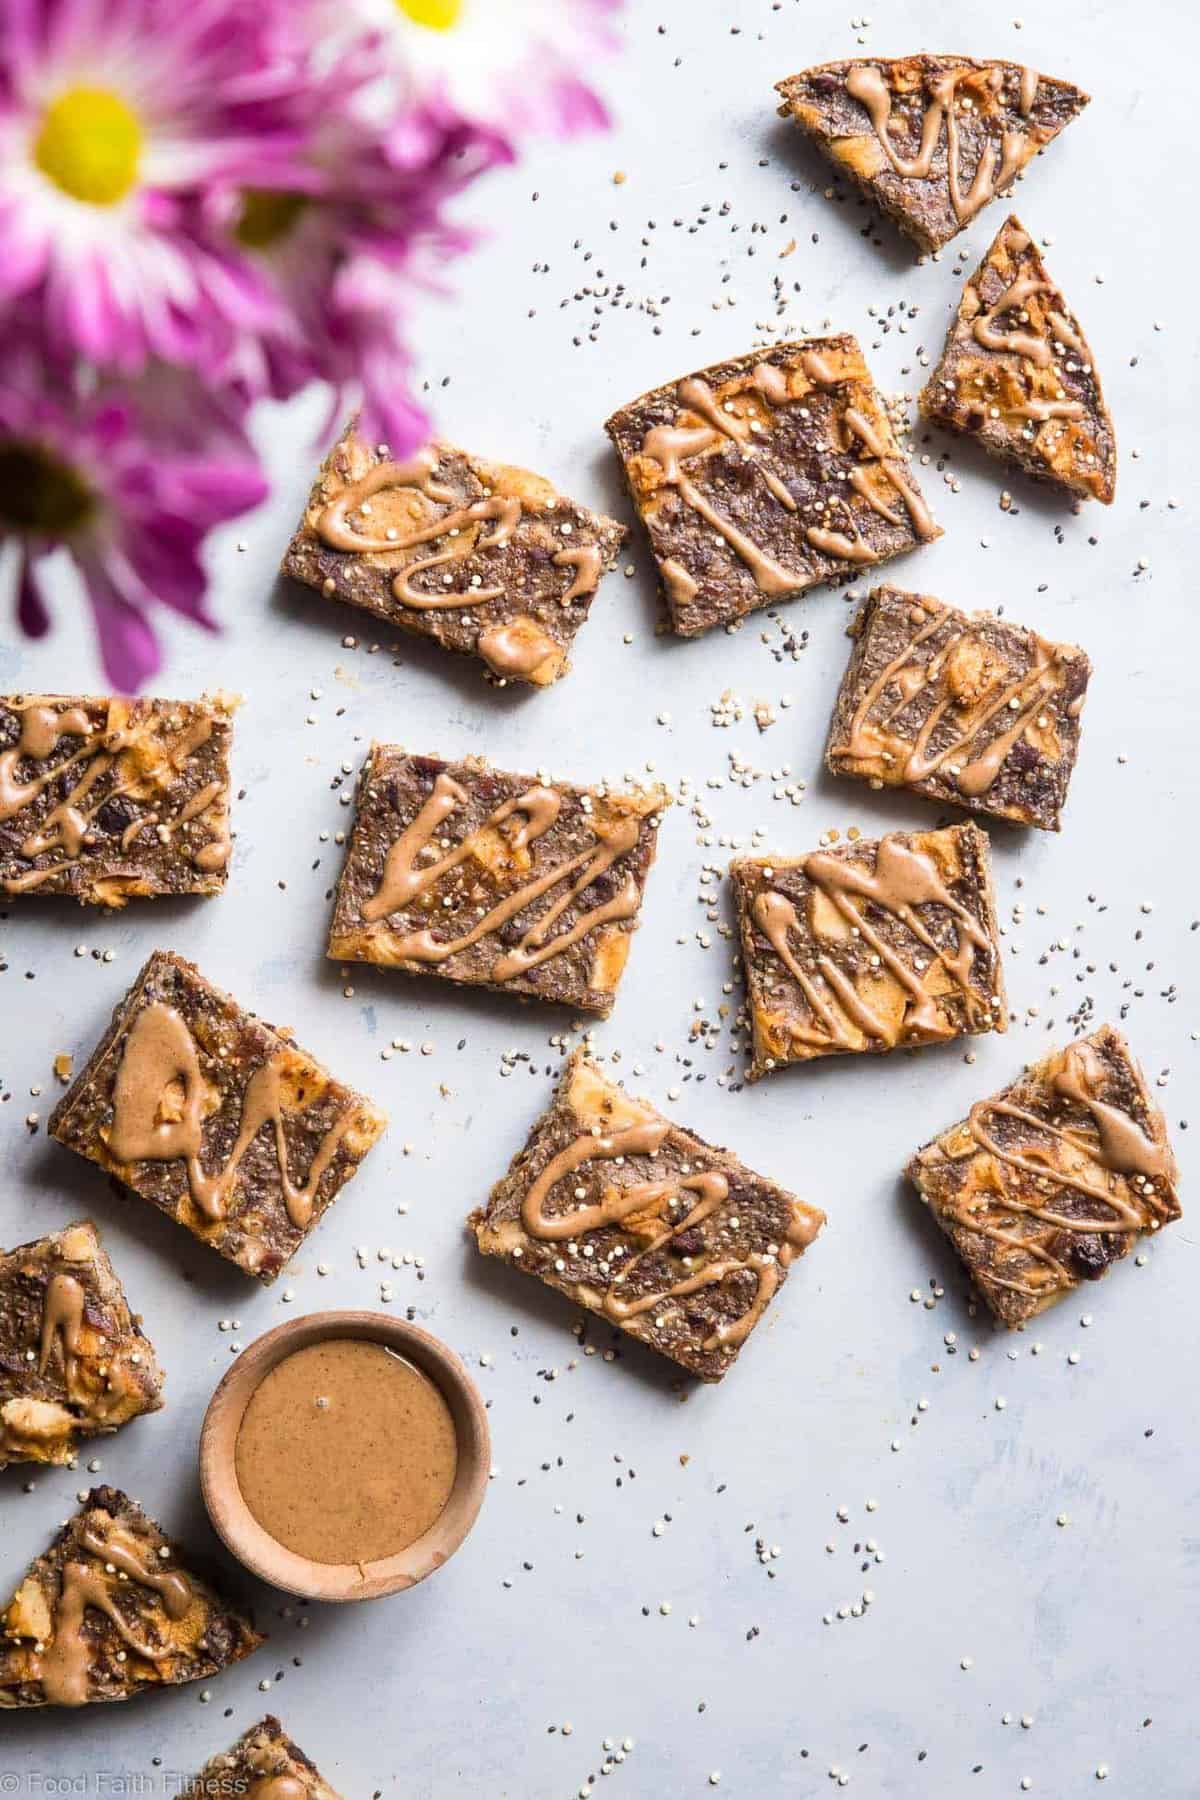 Healthy Quinoa Breakfast Bars in the Slow Cooker - The slow cooker basically makes these homemade energy bars for you! Gluten and dairy free and loaded with fiber to keep you full! Great for snacks too! | #Foodfaithfitness |